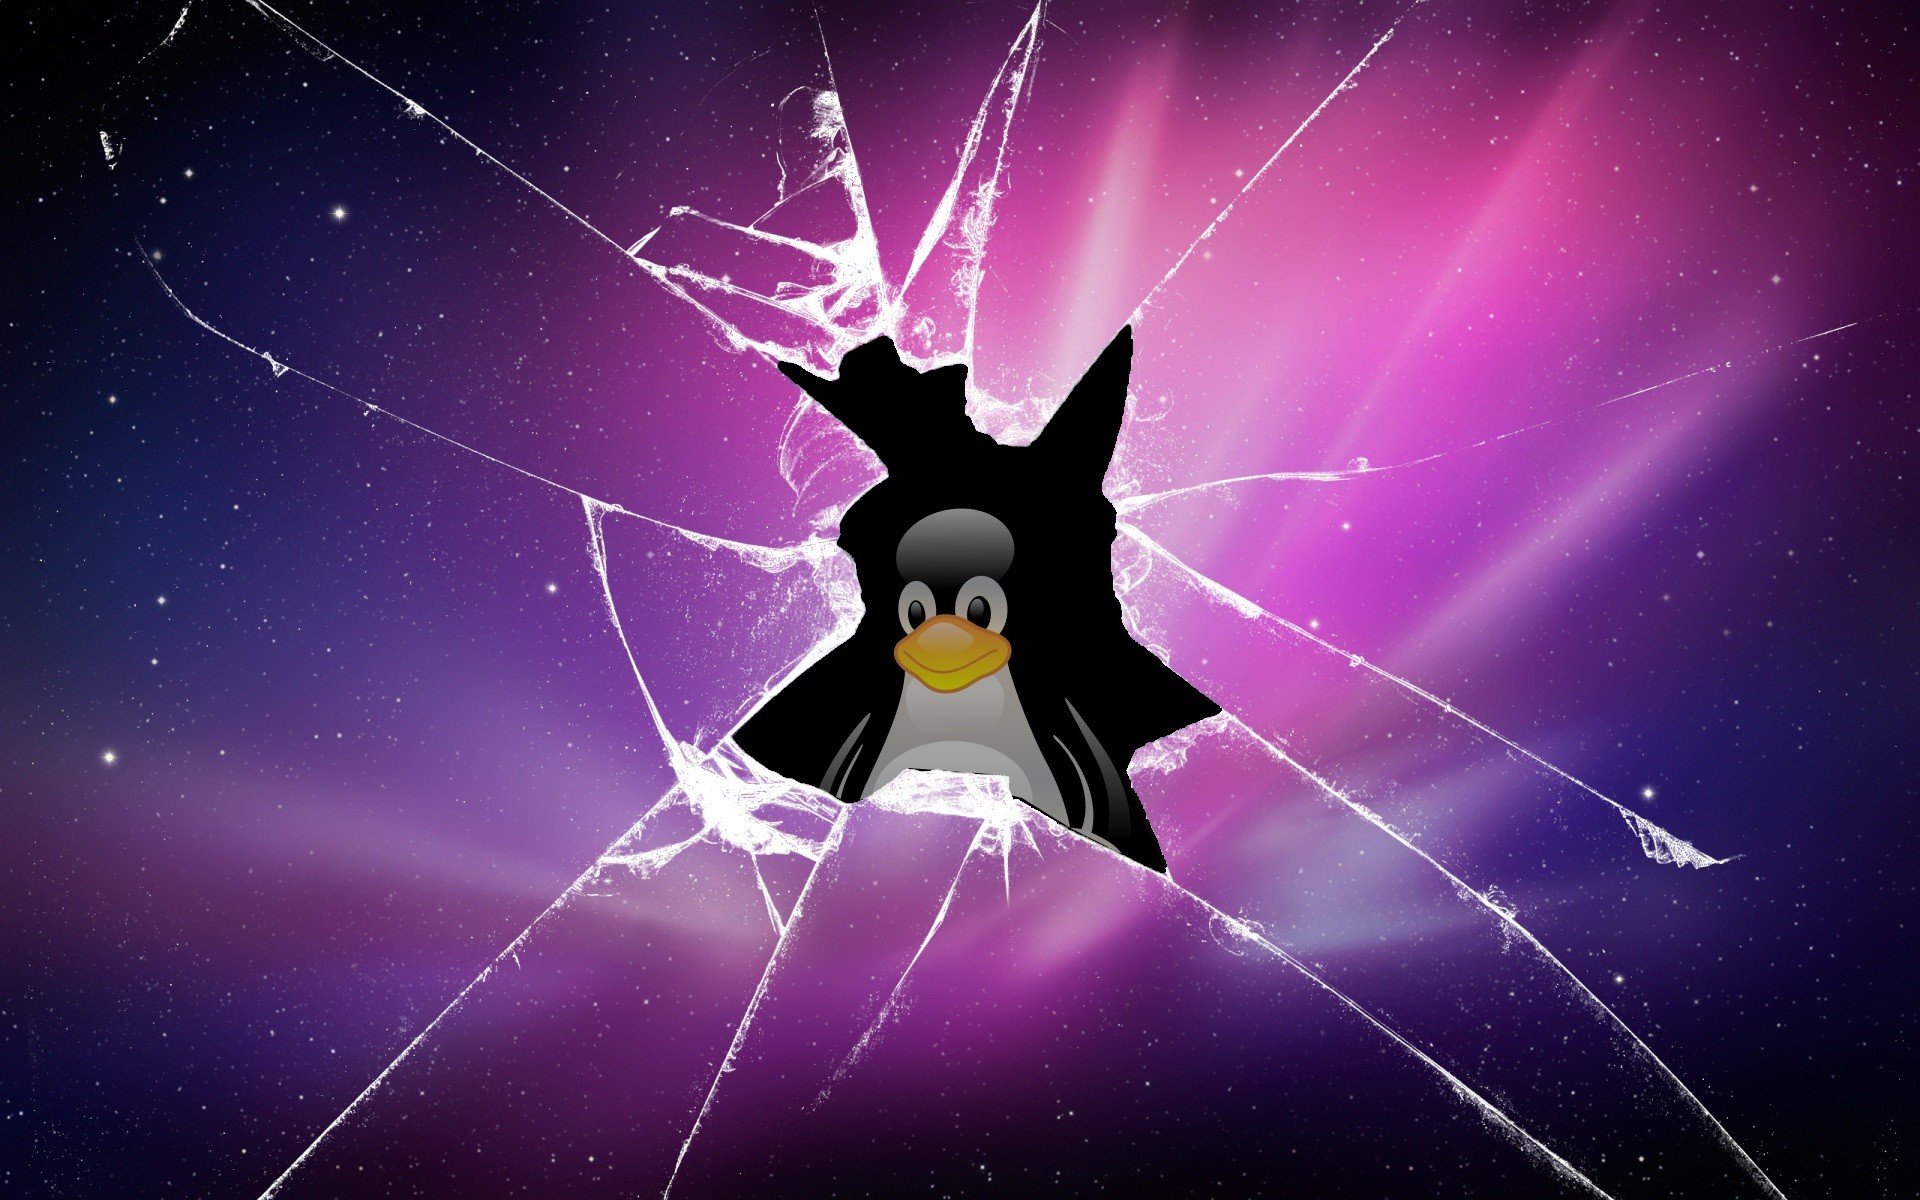 Linux Computer Tux Hd Wallpapers Desktop And Mobile Images Photos